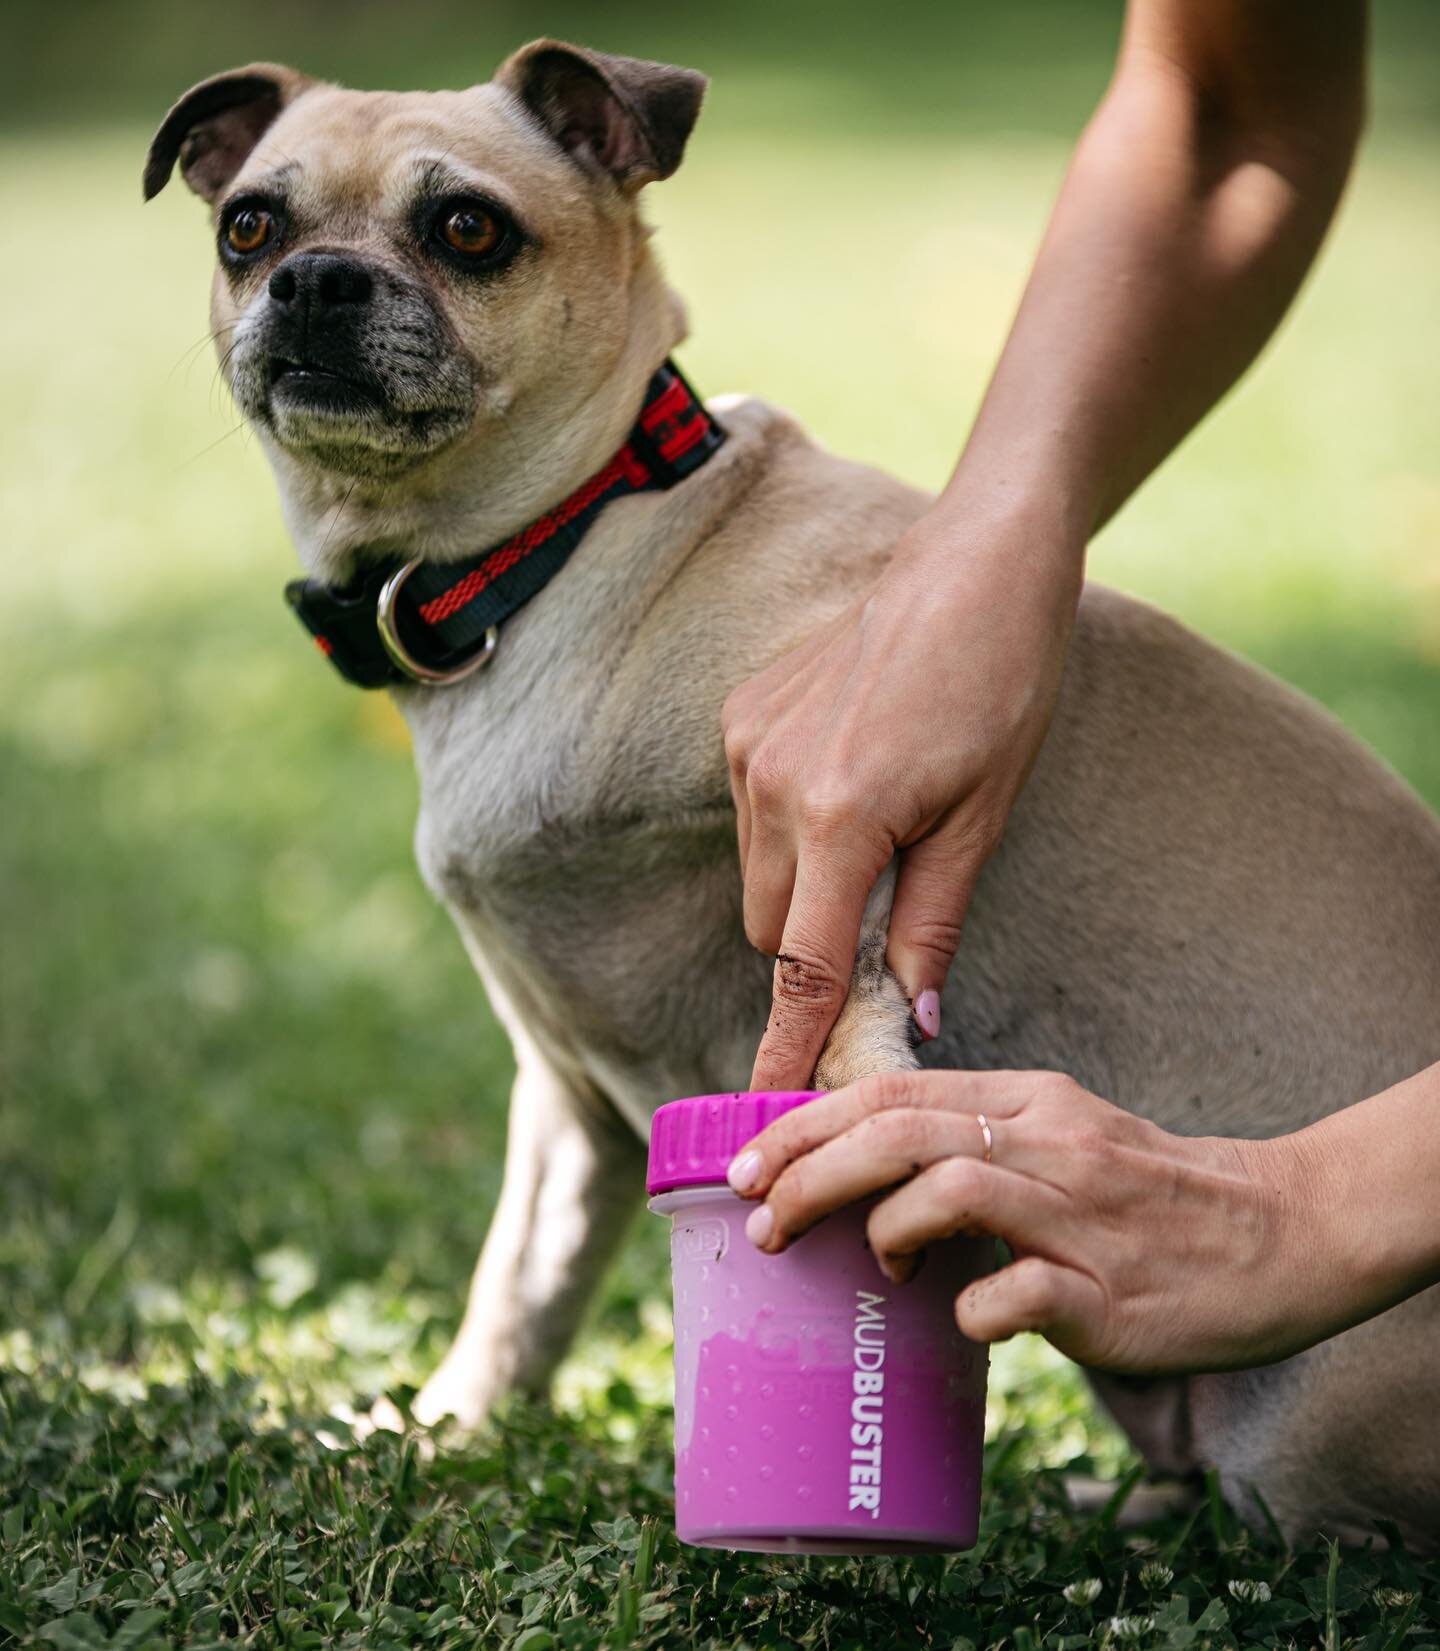 Chai found the Mudbuster so relaxing, she decided to lay down for it 🙊 (Swipe ➡️) The small Mudbuster is perfect for keeping tiny little paws clean on a summer park day! 🐾 
#dexas #mudbuster #pawcleaner